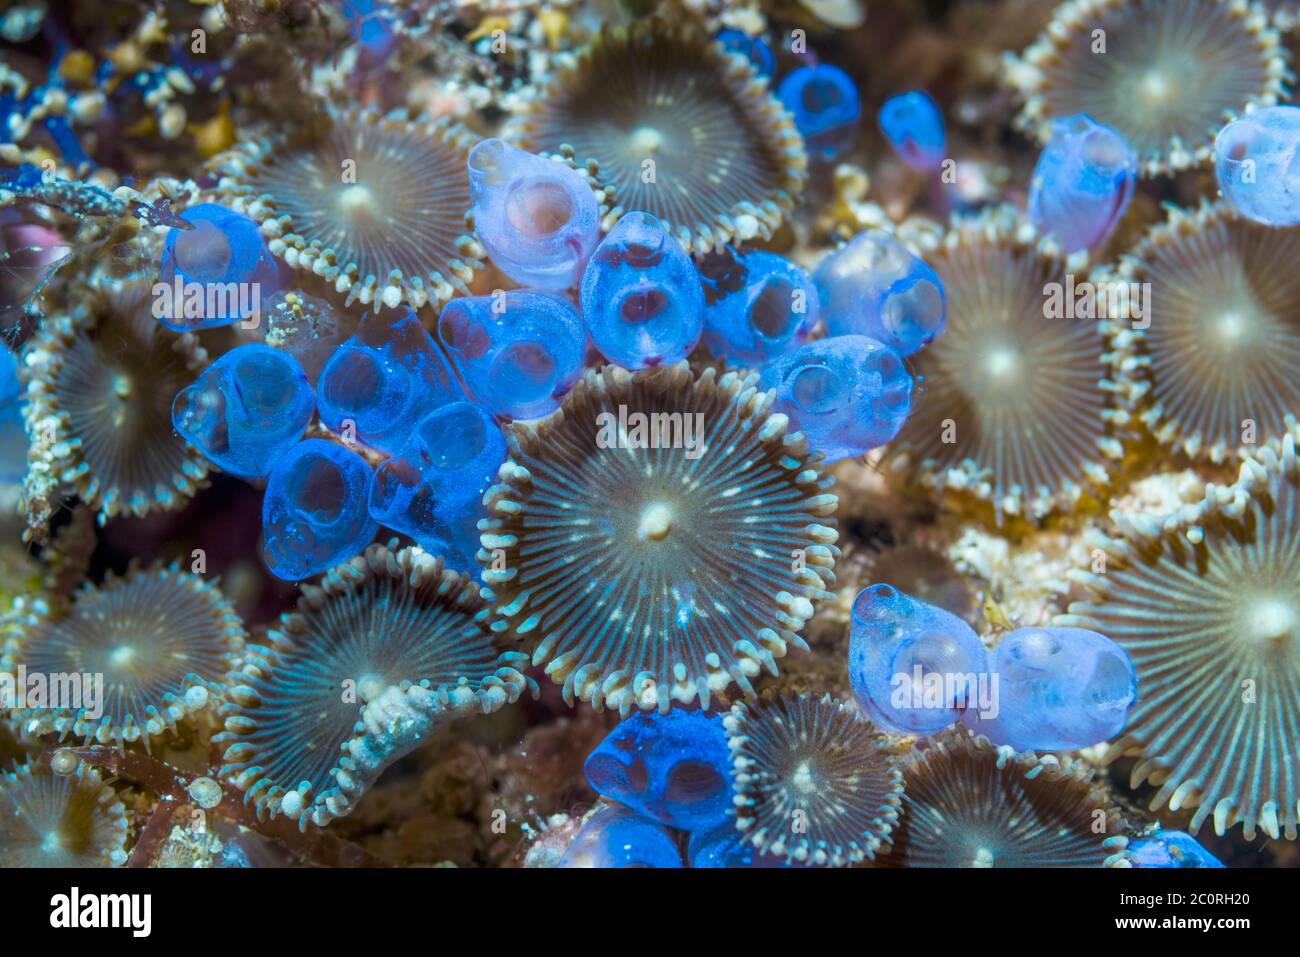 Zoanthids, Colonial anemones - Protopalythoa species and Ascidians [Clavellina sp.].  West Papua, Indonesia.  Indo-West Pacific. Stock Photo